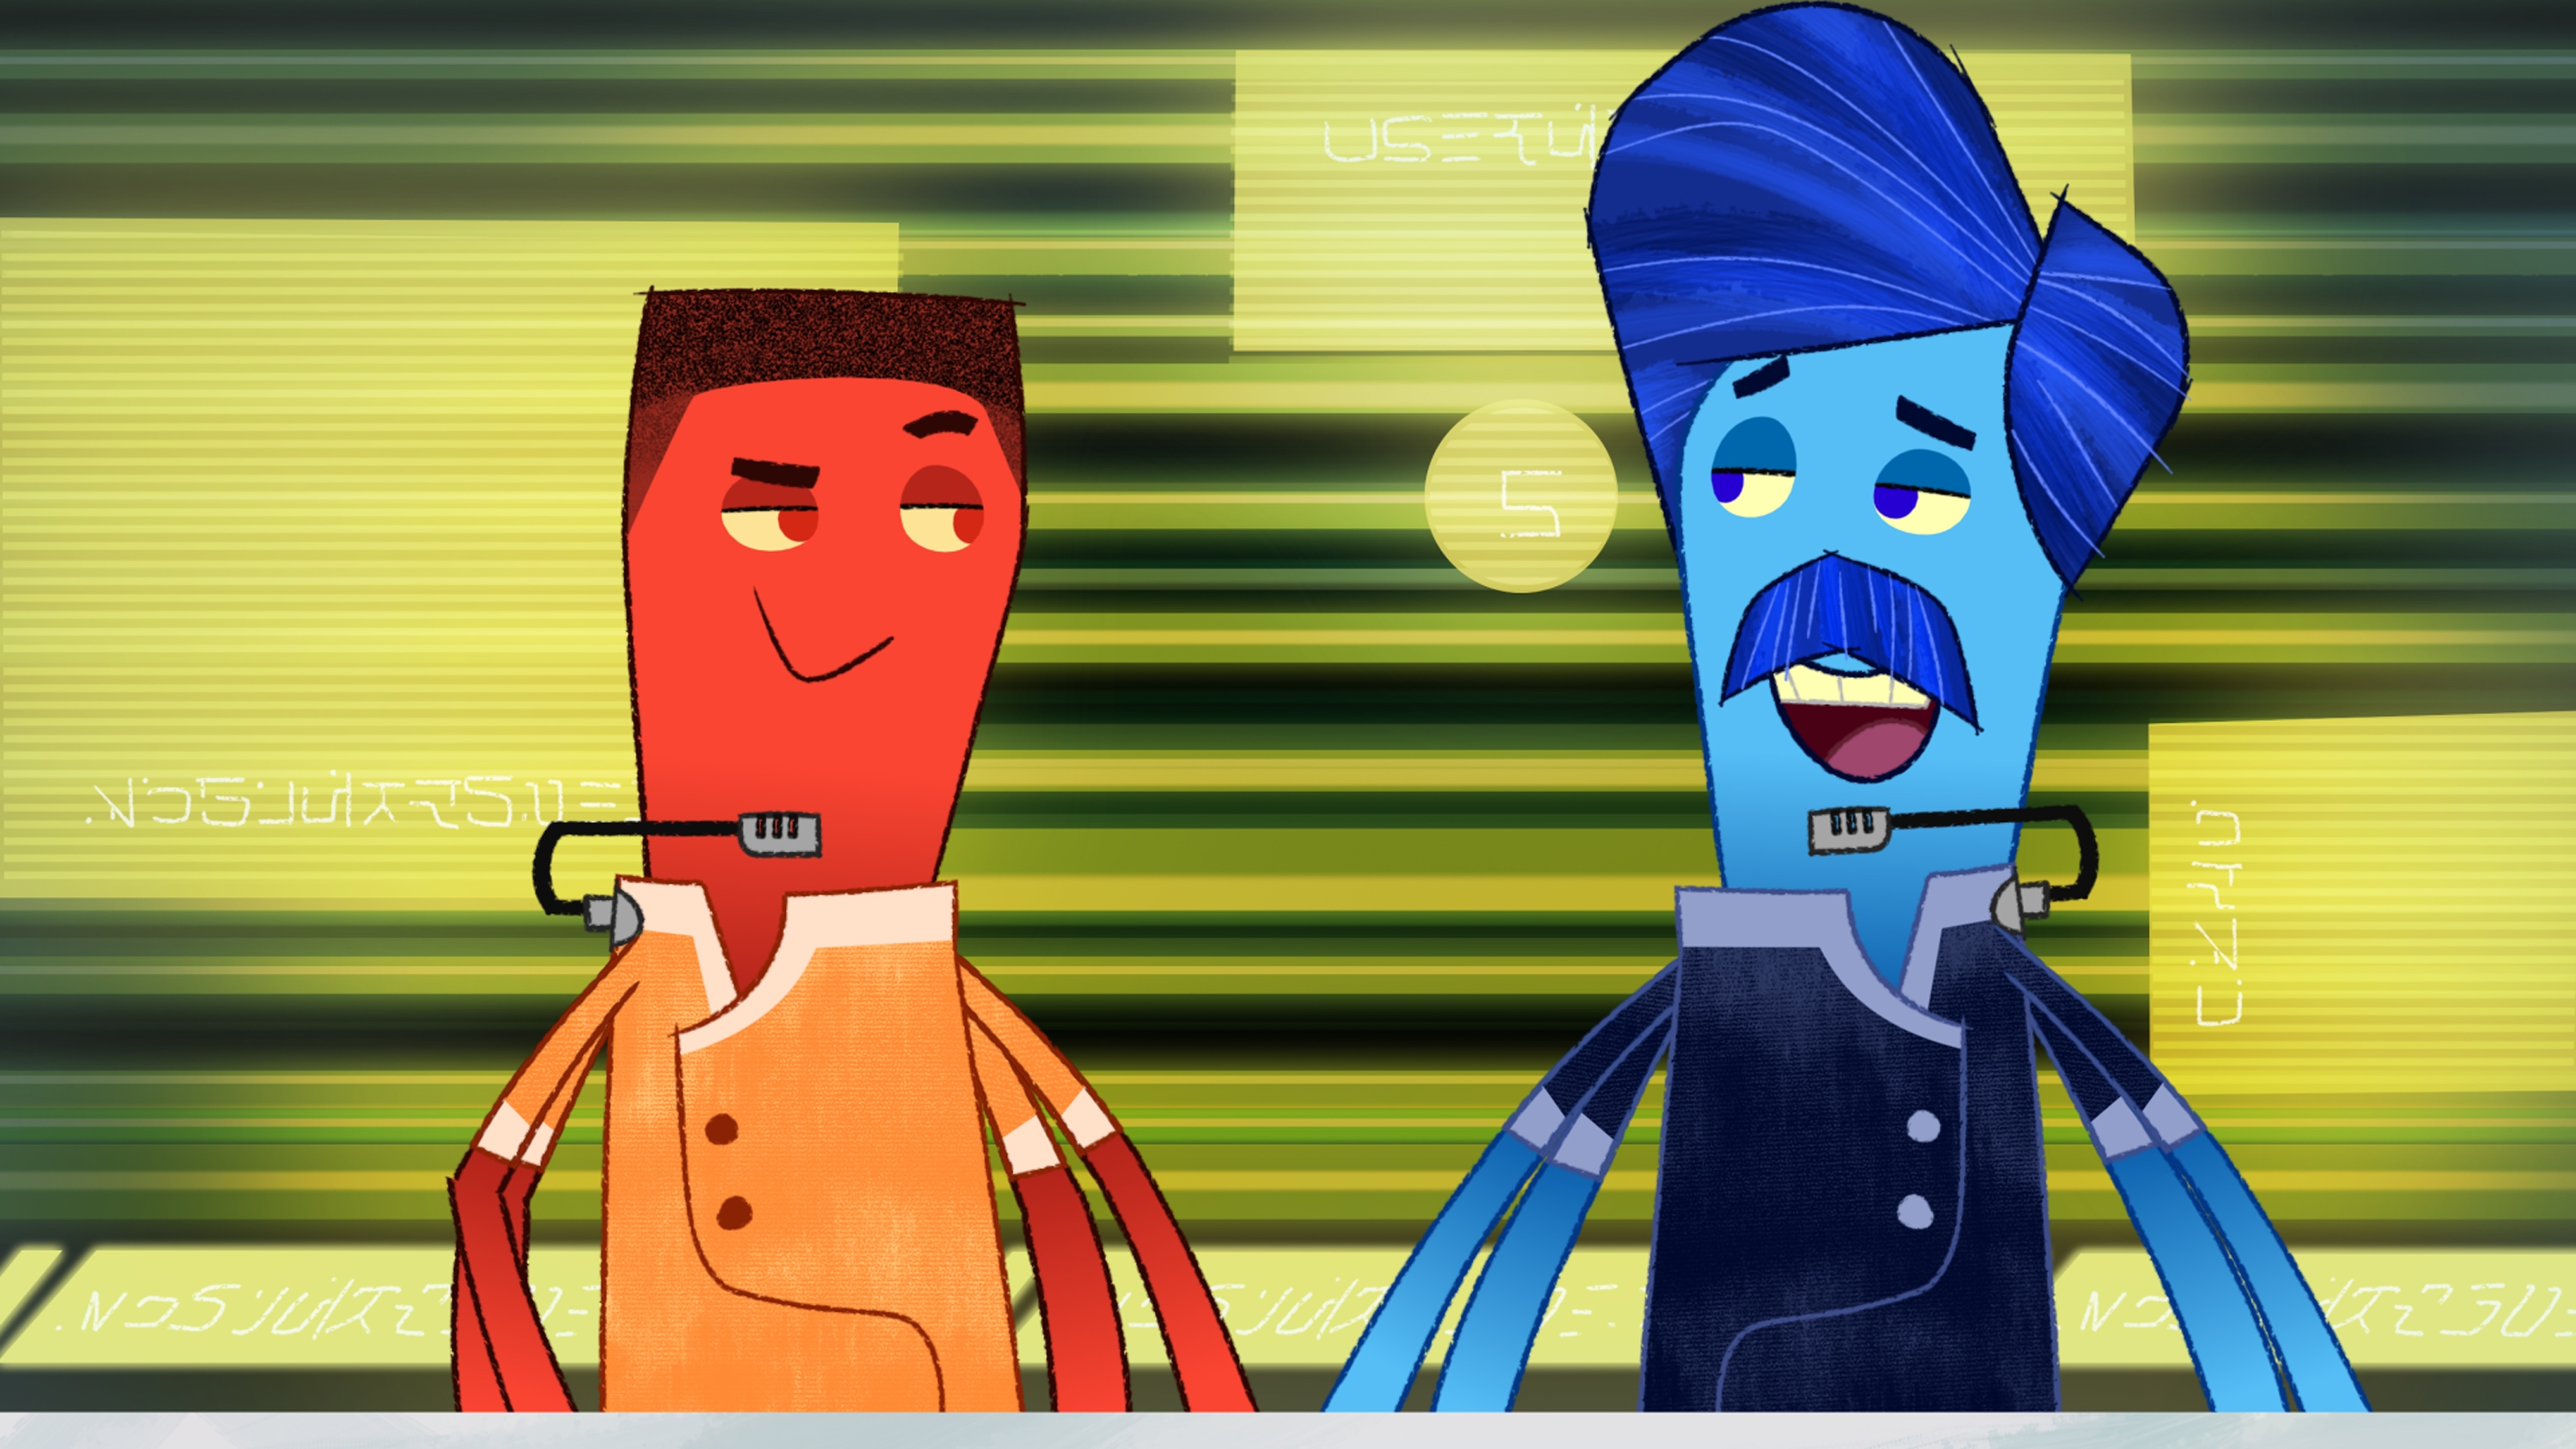 ESPN SportsCenter anchor John Anderson voices the character of an alien sportscaster named Mike (left) in an episode of the Disney XD animated series Penn Zero: Part Time Hero airing Tuesday night. (Photo courtesy Disney)